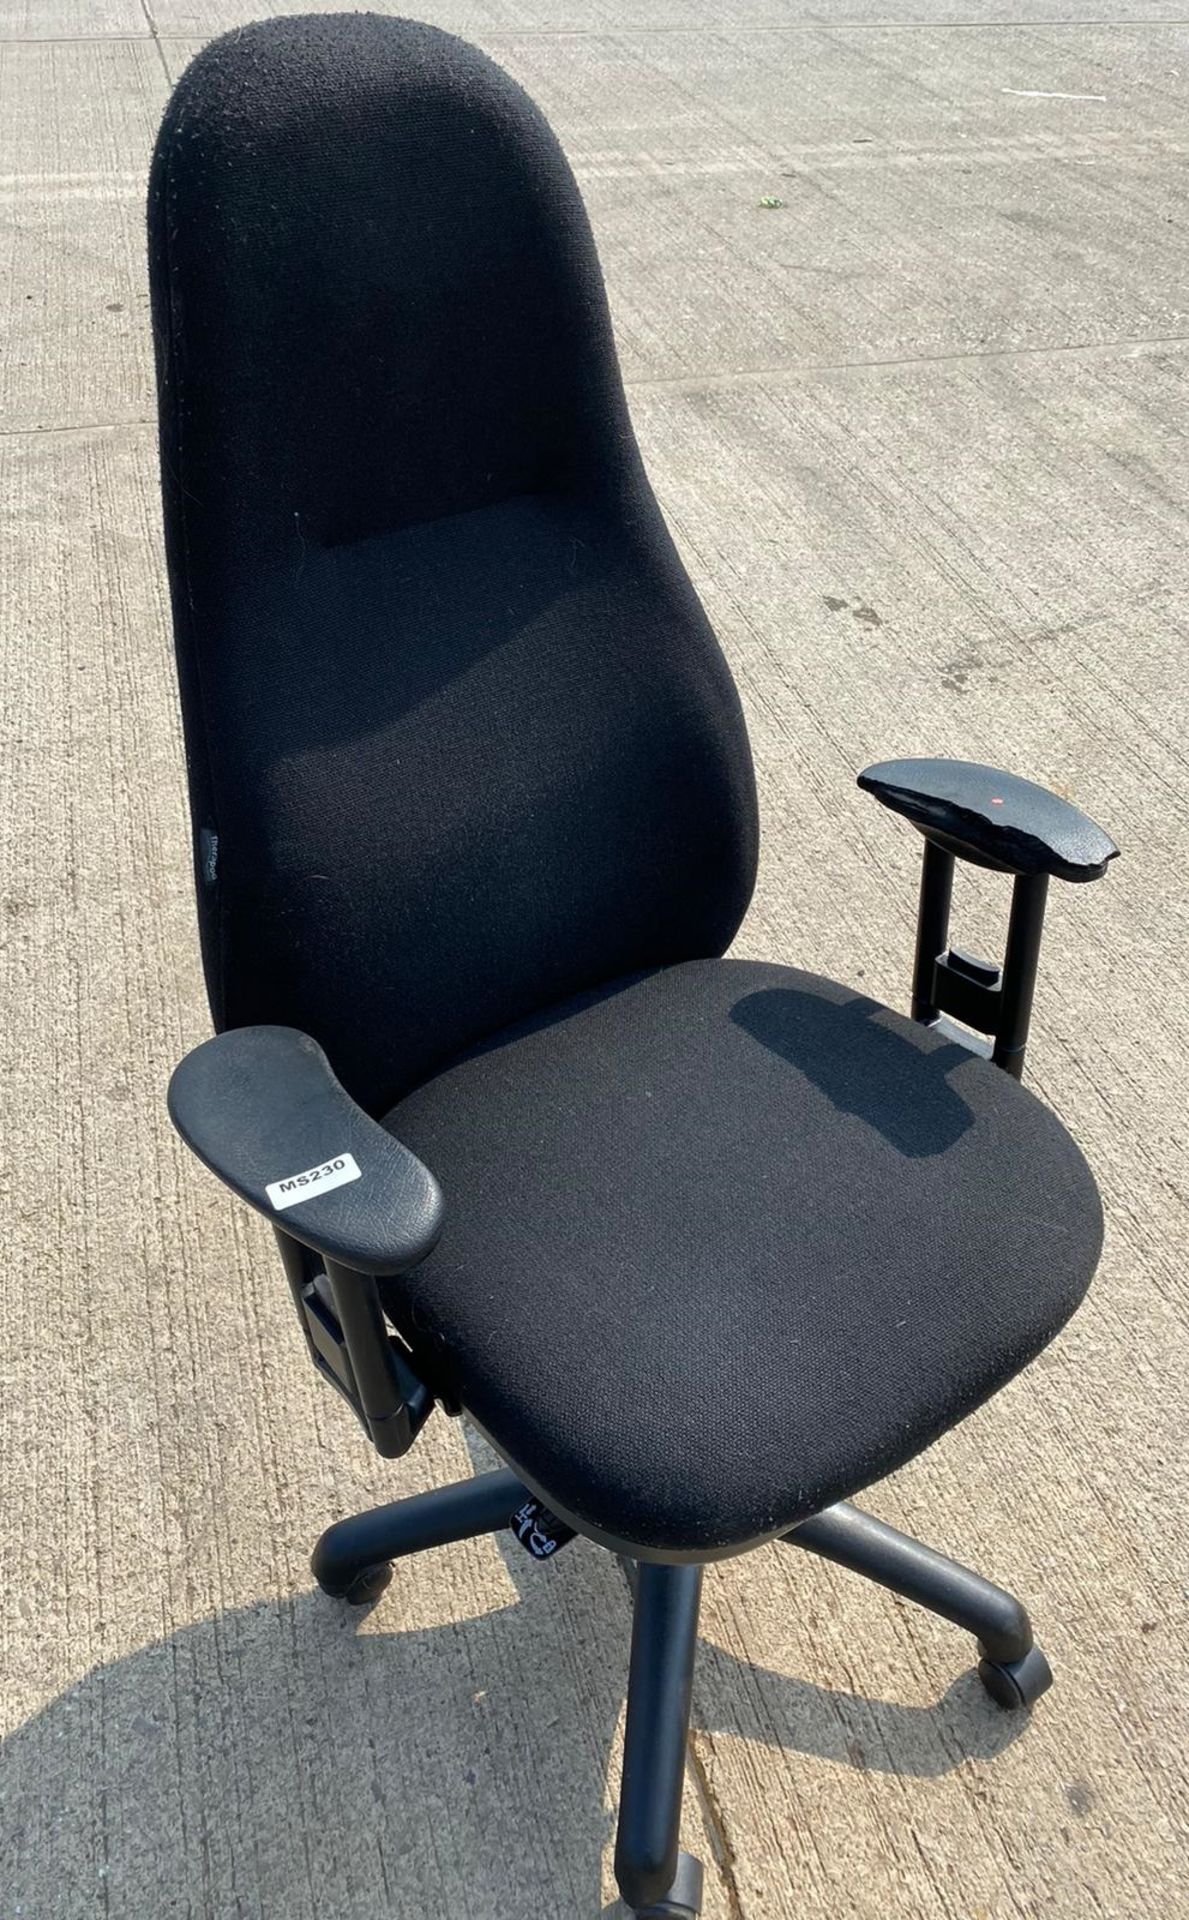 1 x Therapod Classic Synchro High Back Chair with Arms - Used Condition - Location: Altrincham WA14